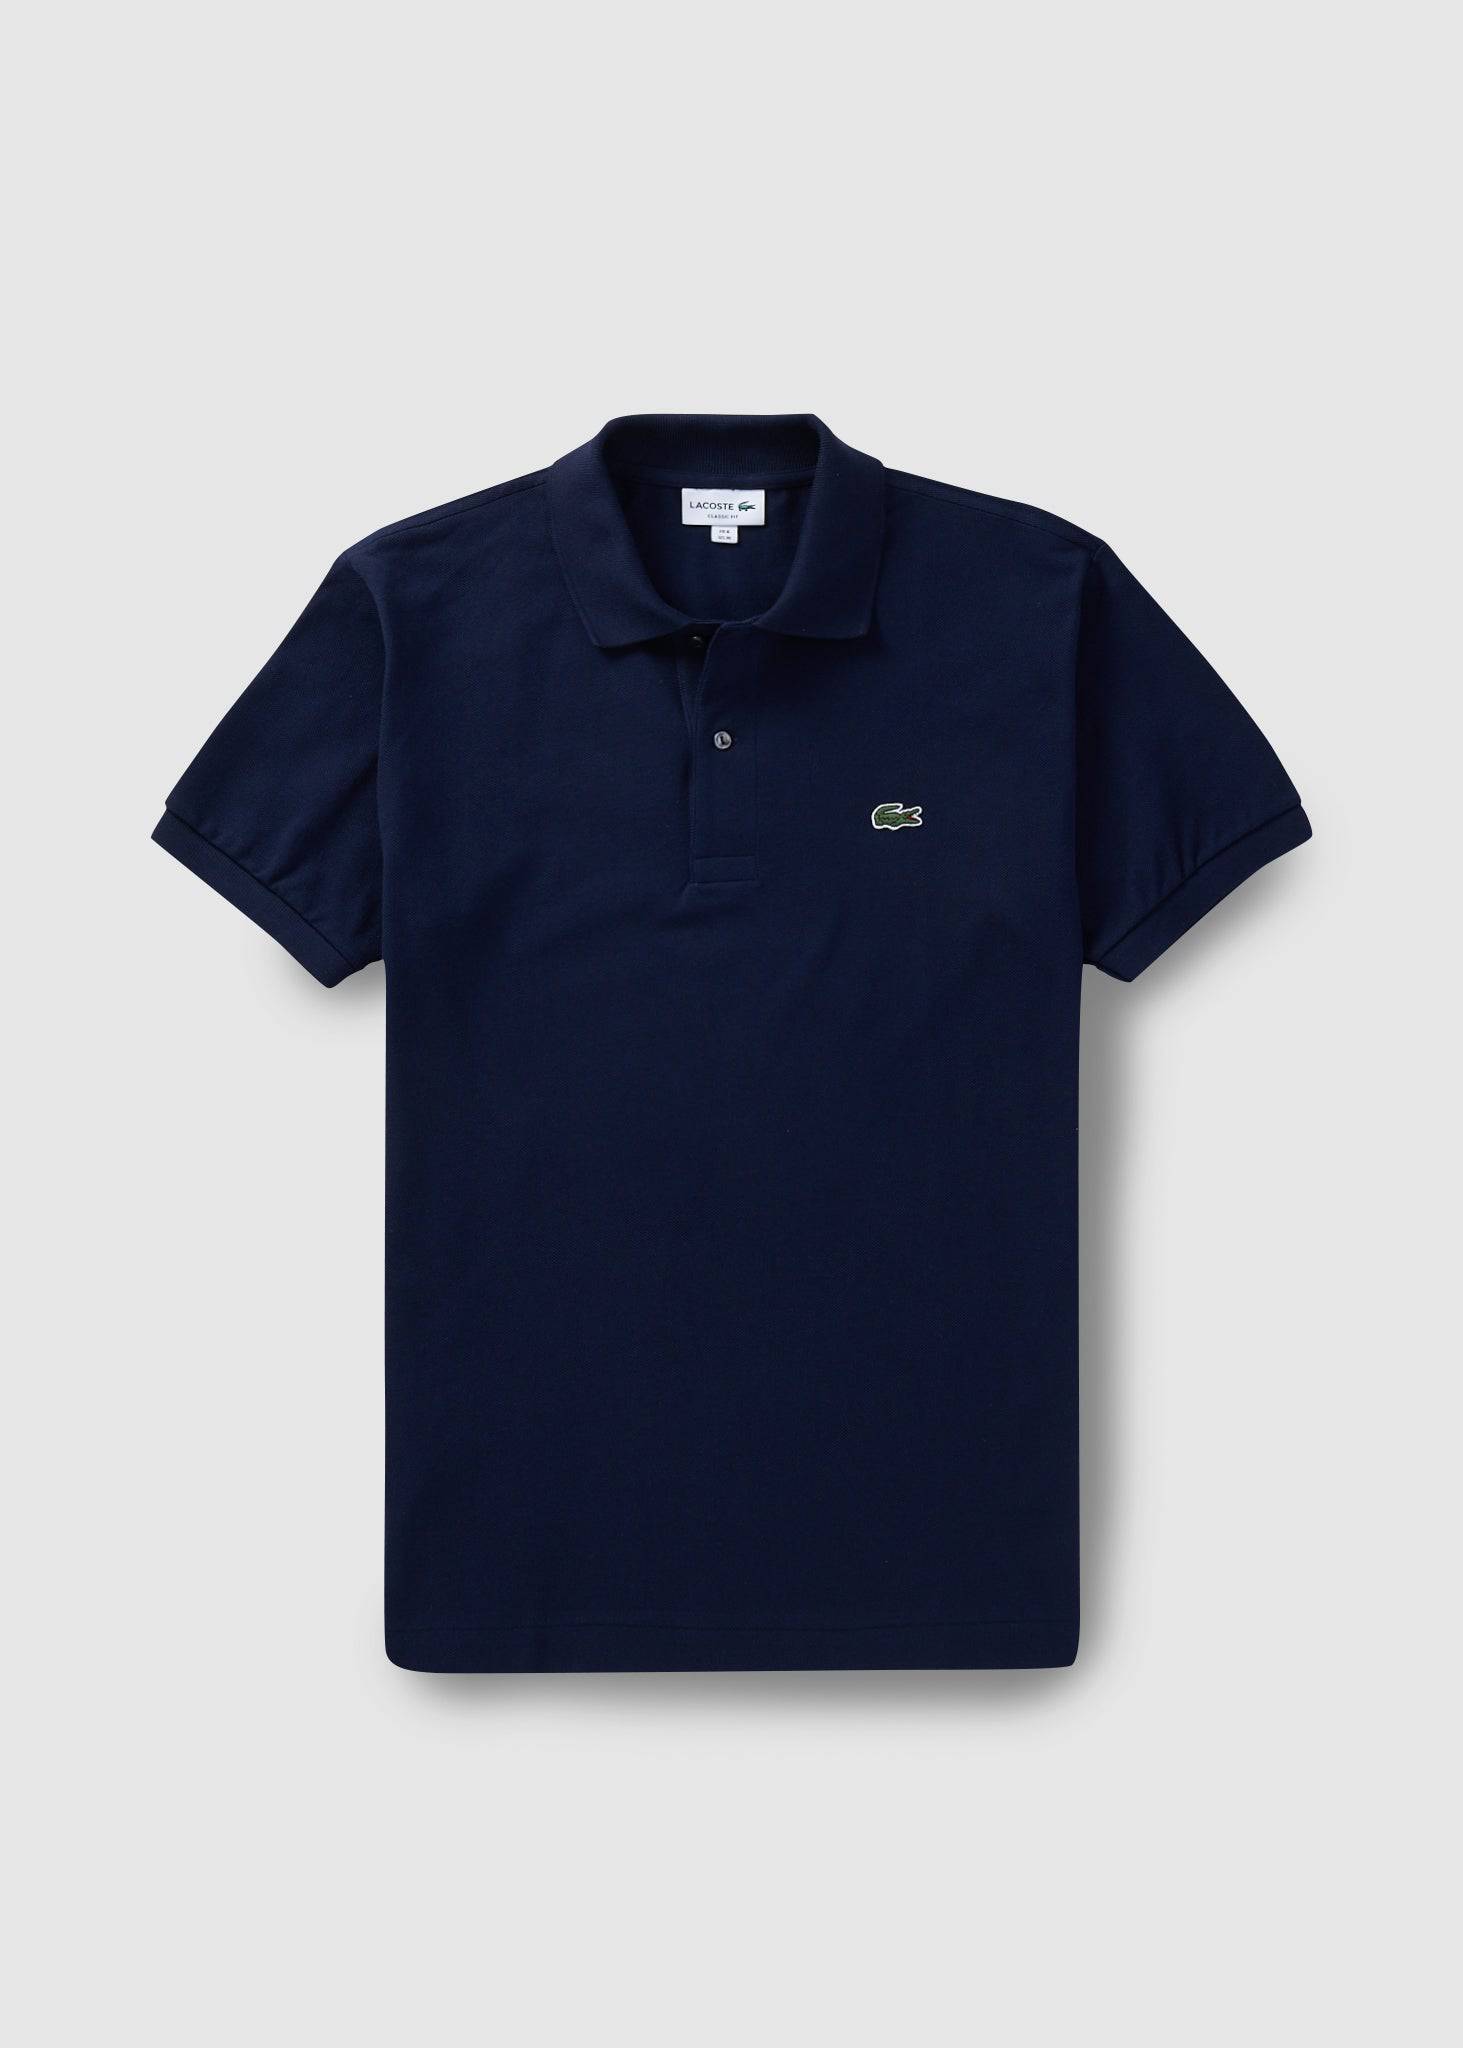 Lacoste Mens Classic Pique Polo Shirt In Navy - Navy